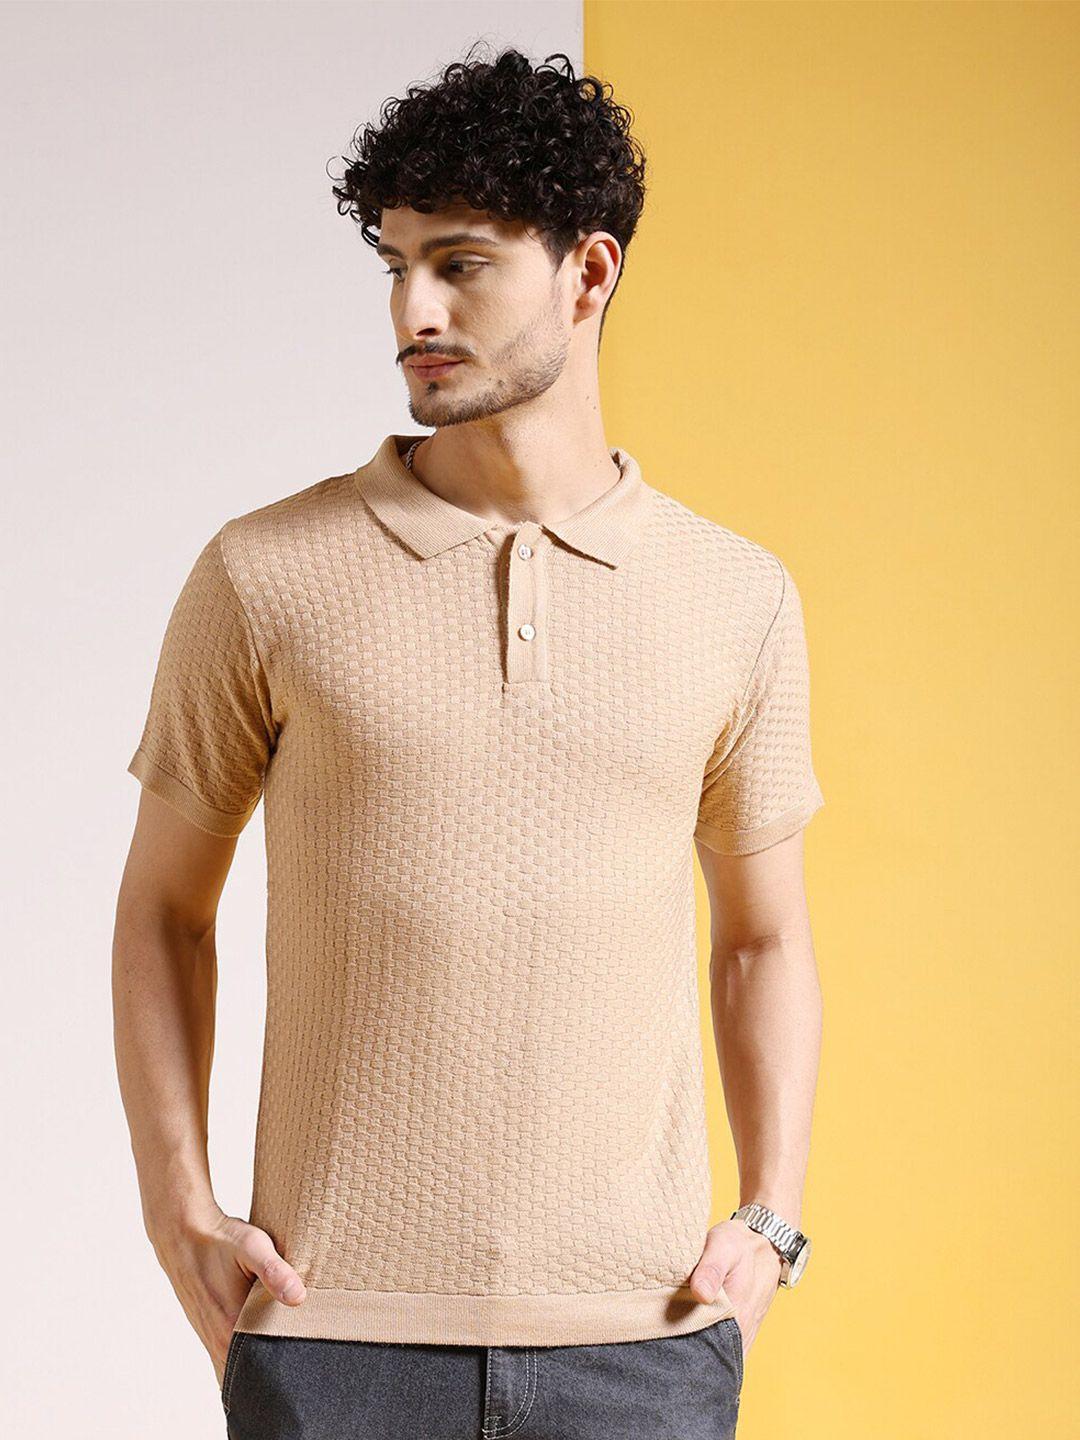 the indian garage co flat knit self design polo collar pullover